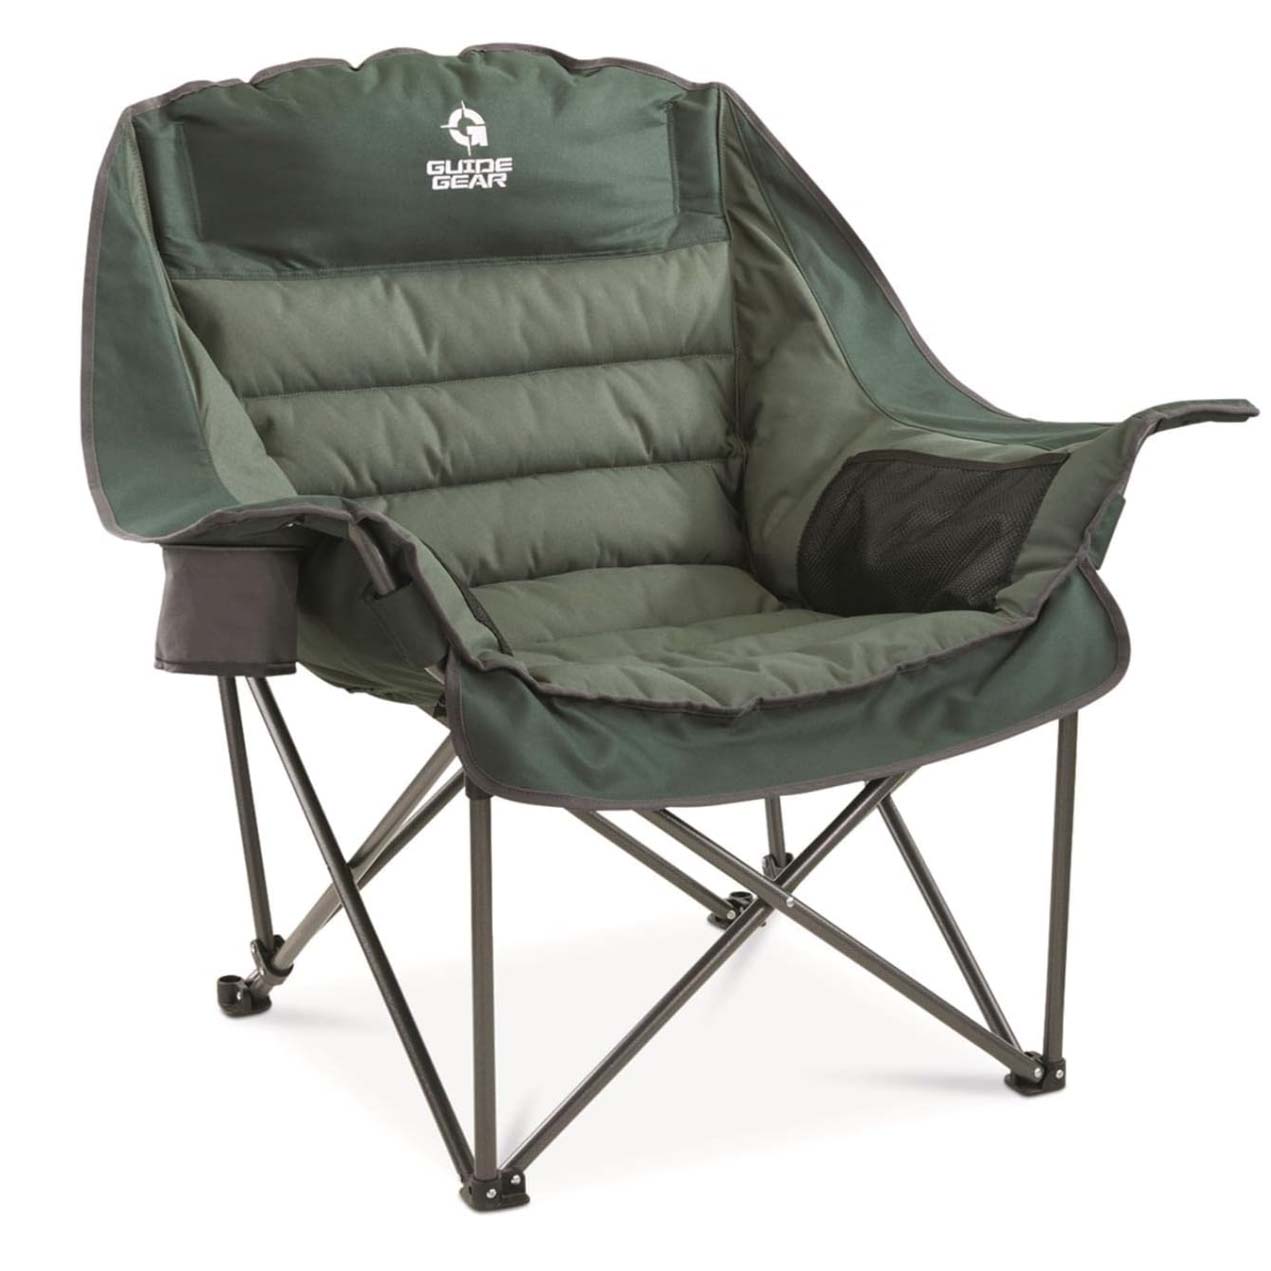 Guide Gear Oversized XL Padded Camping Chair in dark green